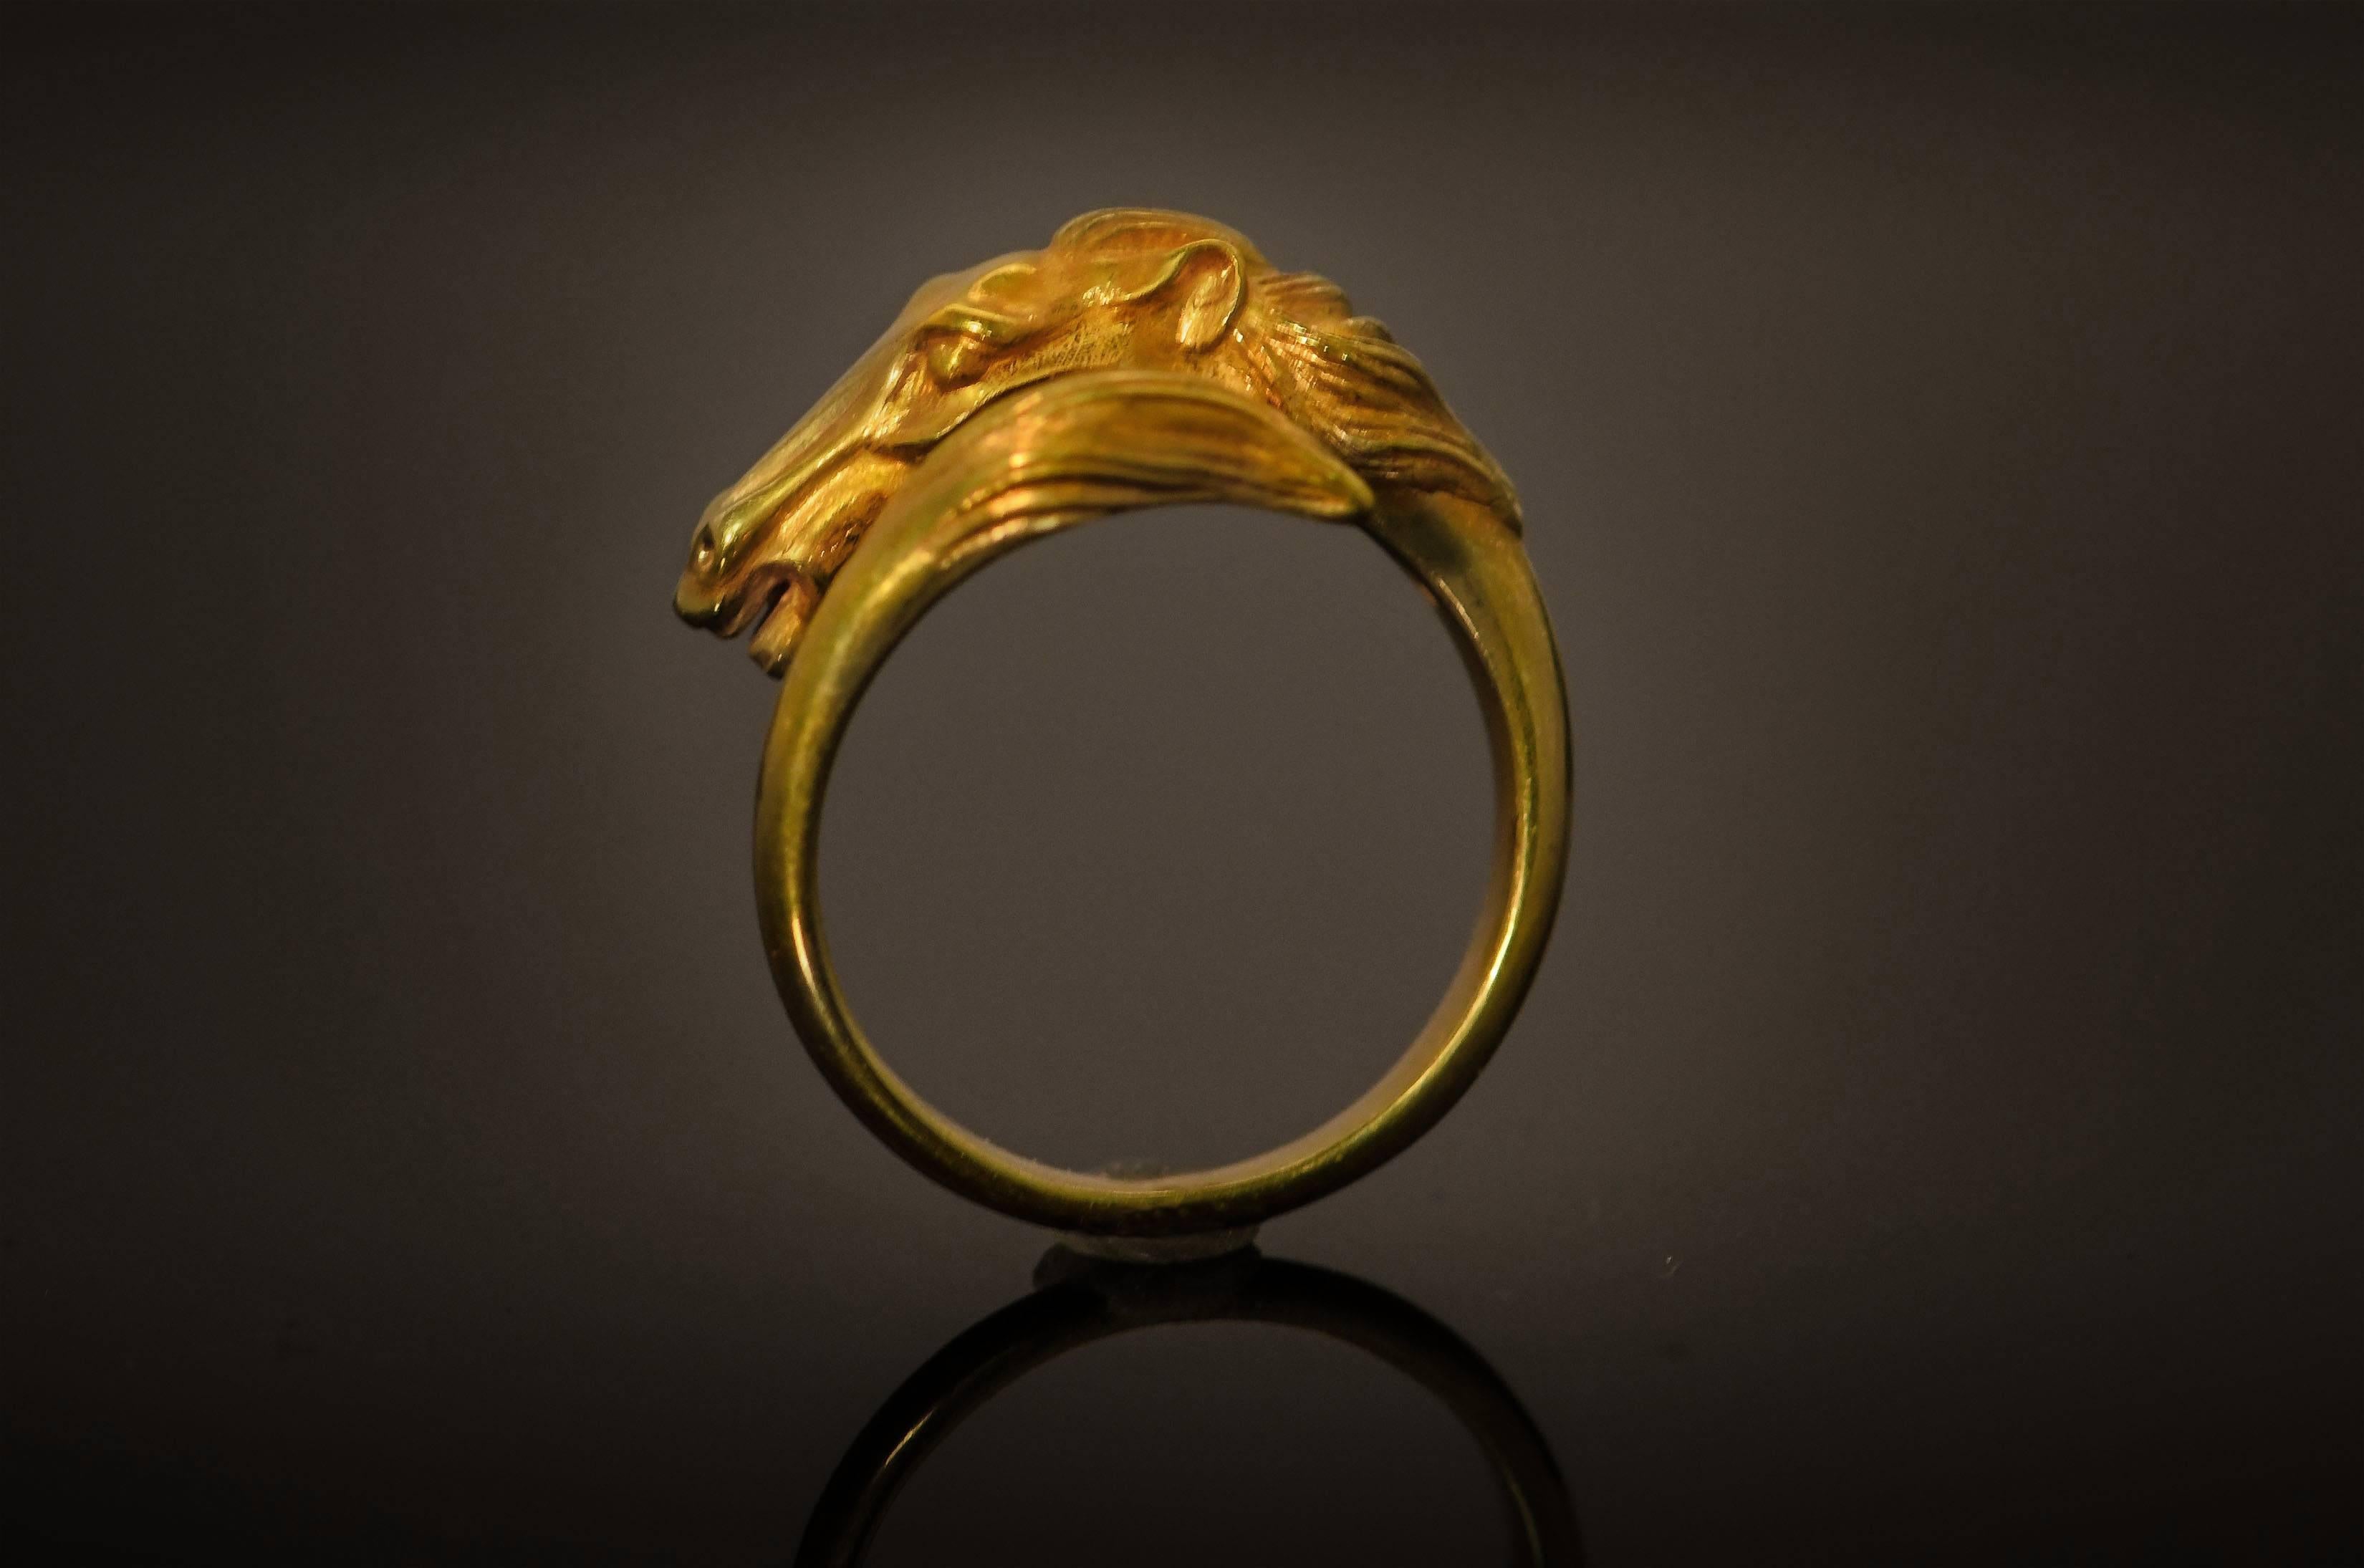 The horse shown on this beautiful ring is such a handsome specimen. His mane is streaming behind him in the wind as he races on. He is straining with the effort but seems to be enjoying it. The tail forms the other end of the crossover ring, the